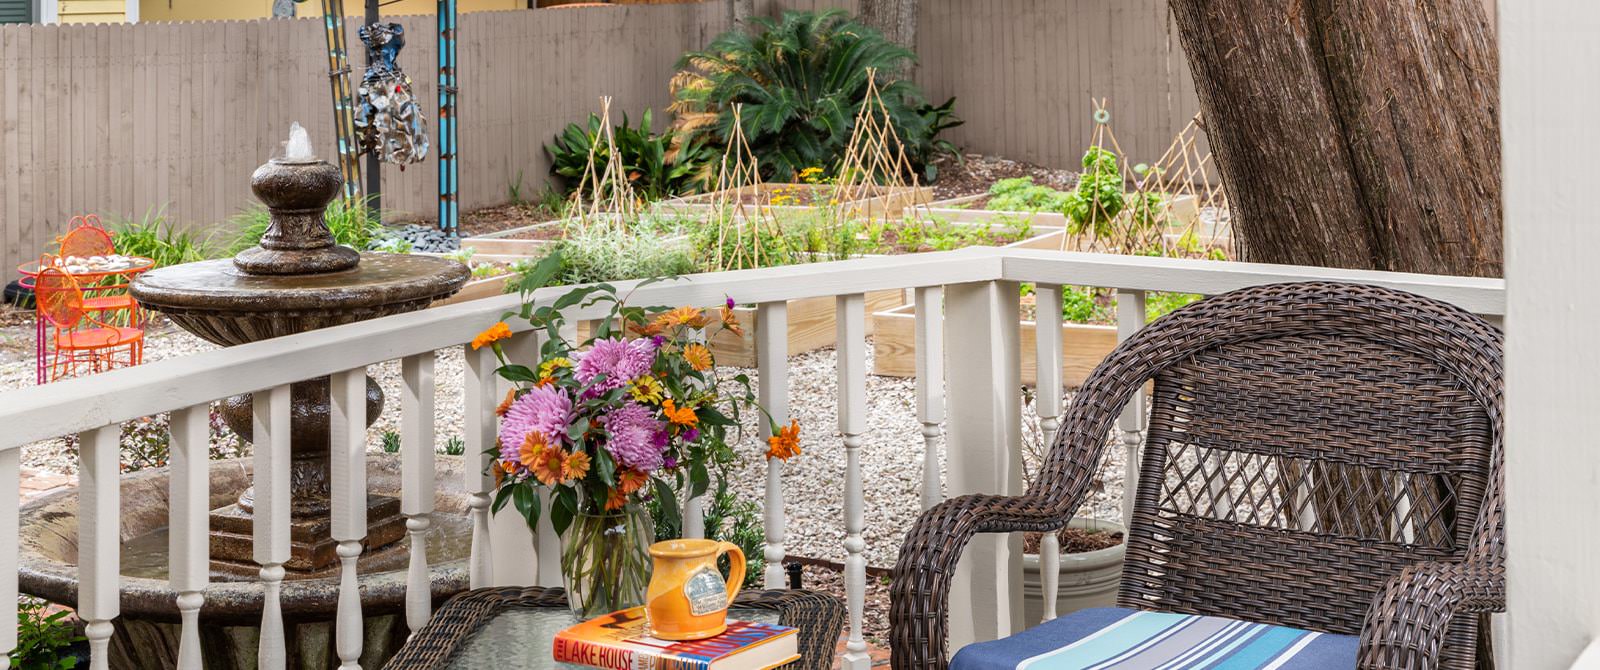 Close up view of wicker chair and table with orange mug, book, and vase of flowers with raised garden beds in the background